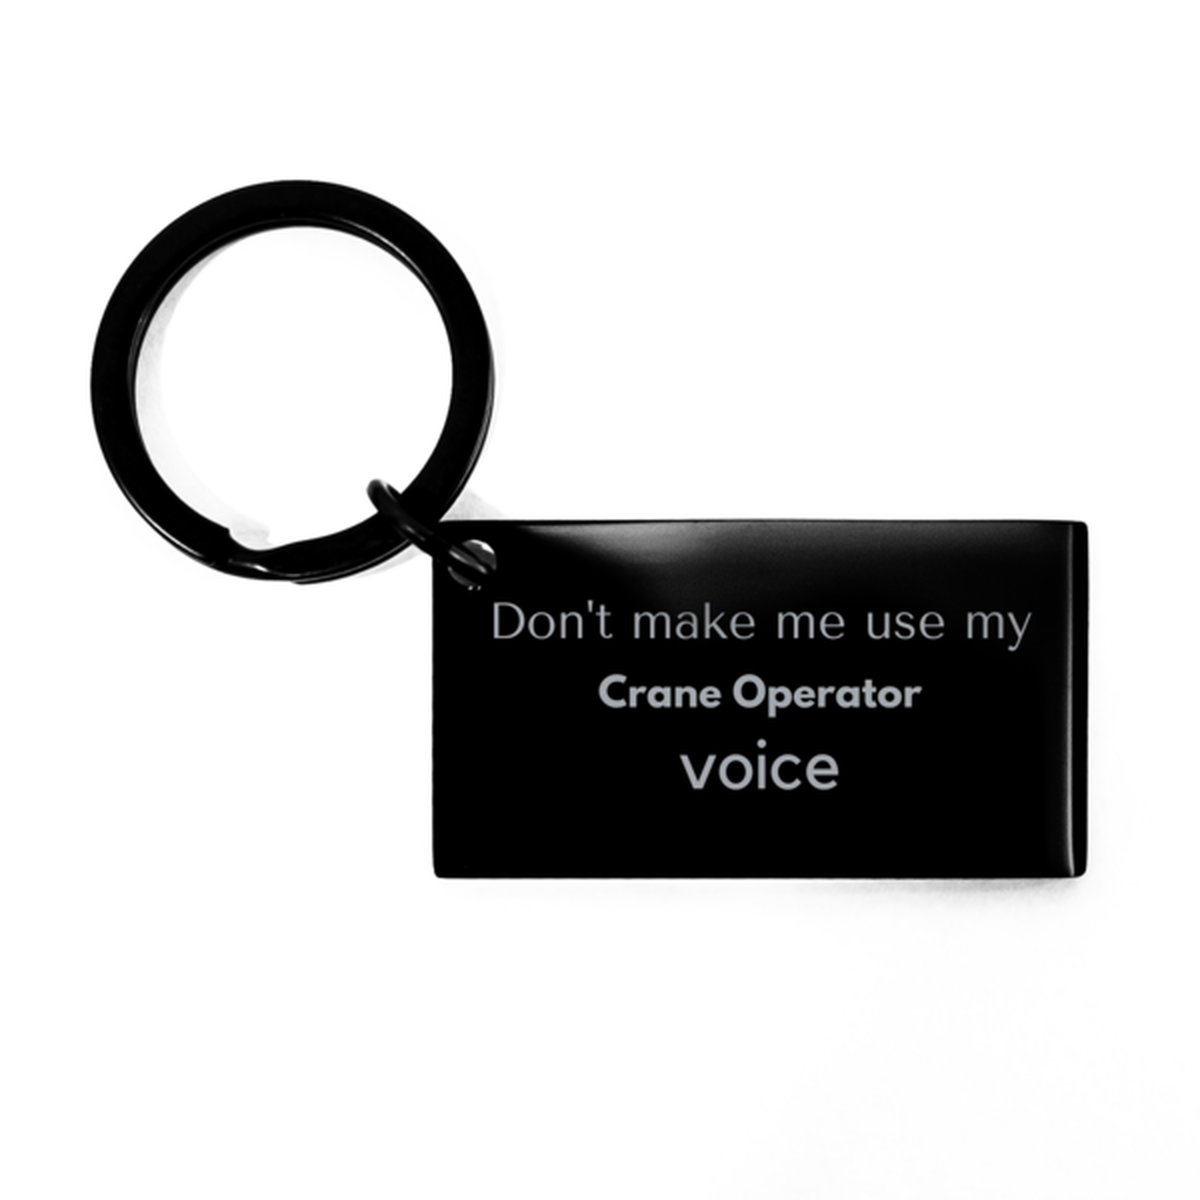 Don't make me use my Crane Operator voice, Sarcasm Crane Operator Gifts, Christmas Crane Operator Keychain Birthday Unique Gifts For Crane Operator Coworkers, Men, Women, Colleague, Friends